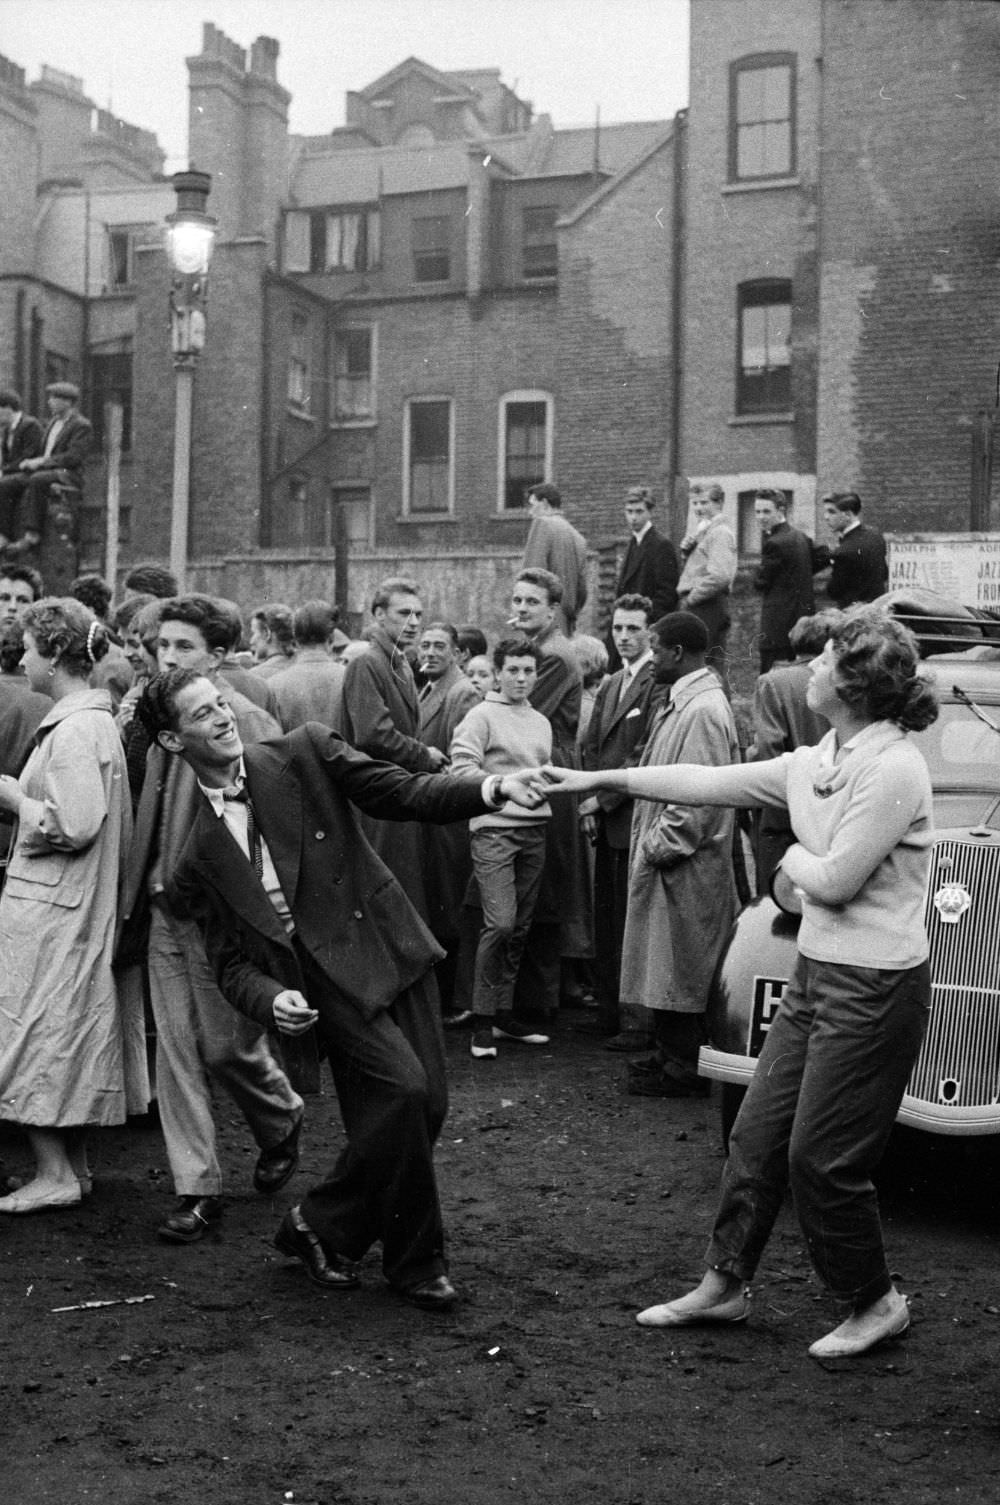 London’s youth hang out on the streets of Soho in 1956.